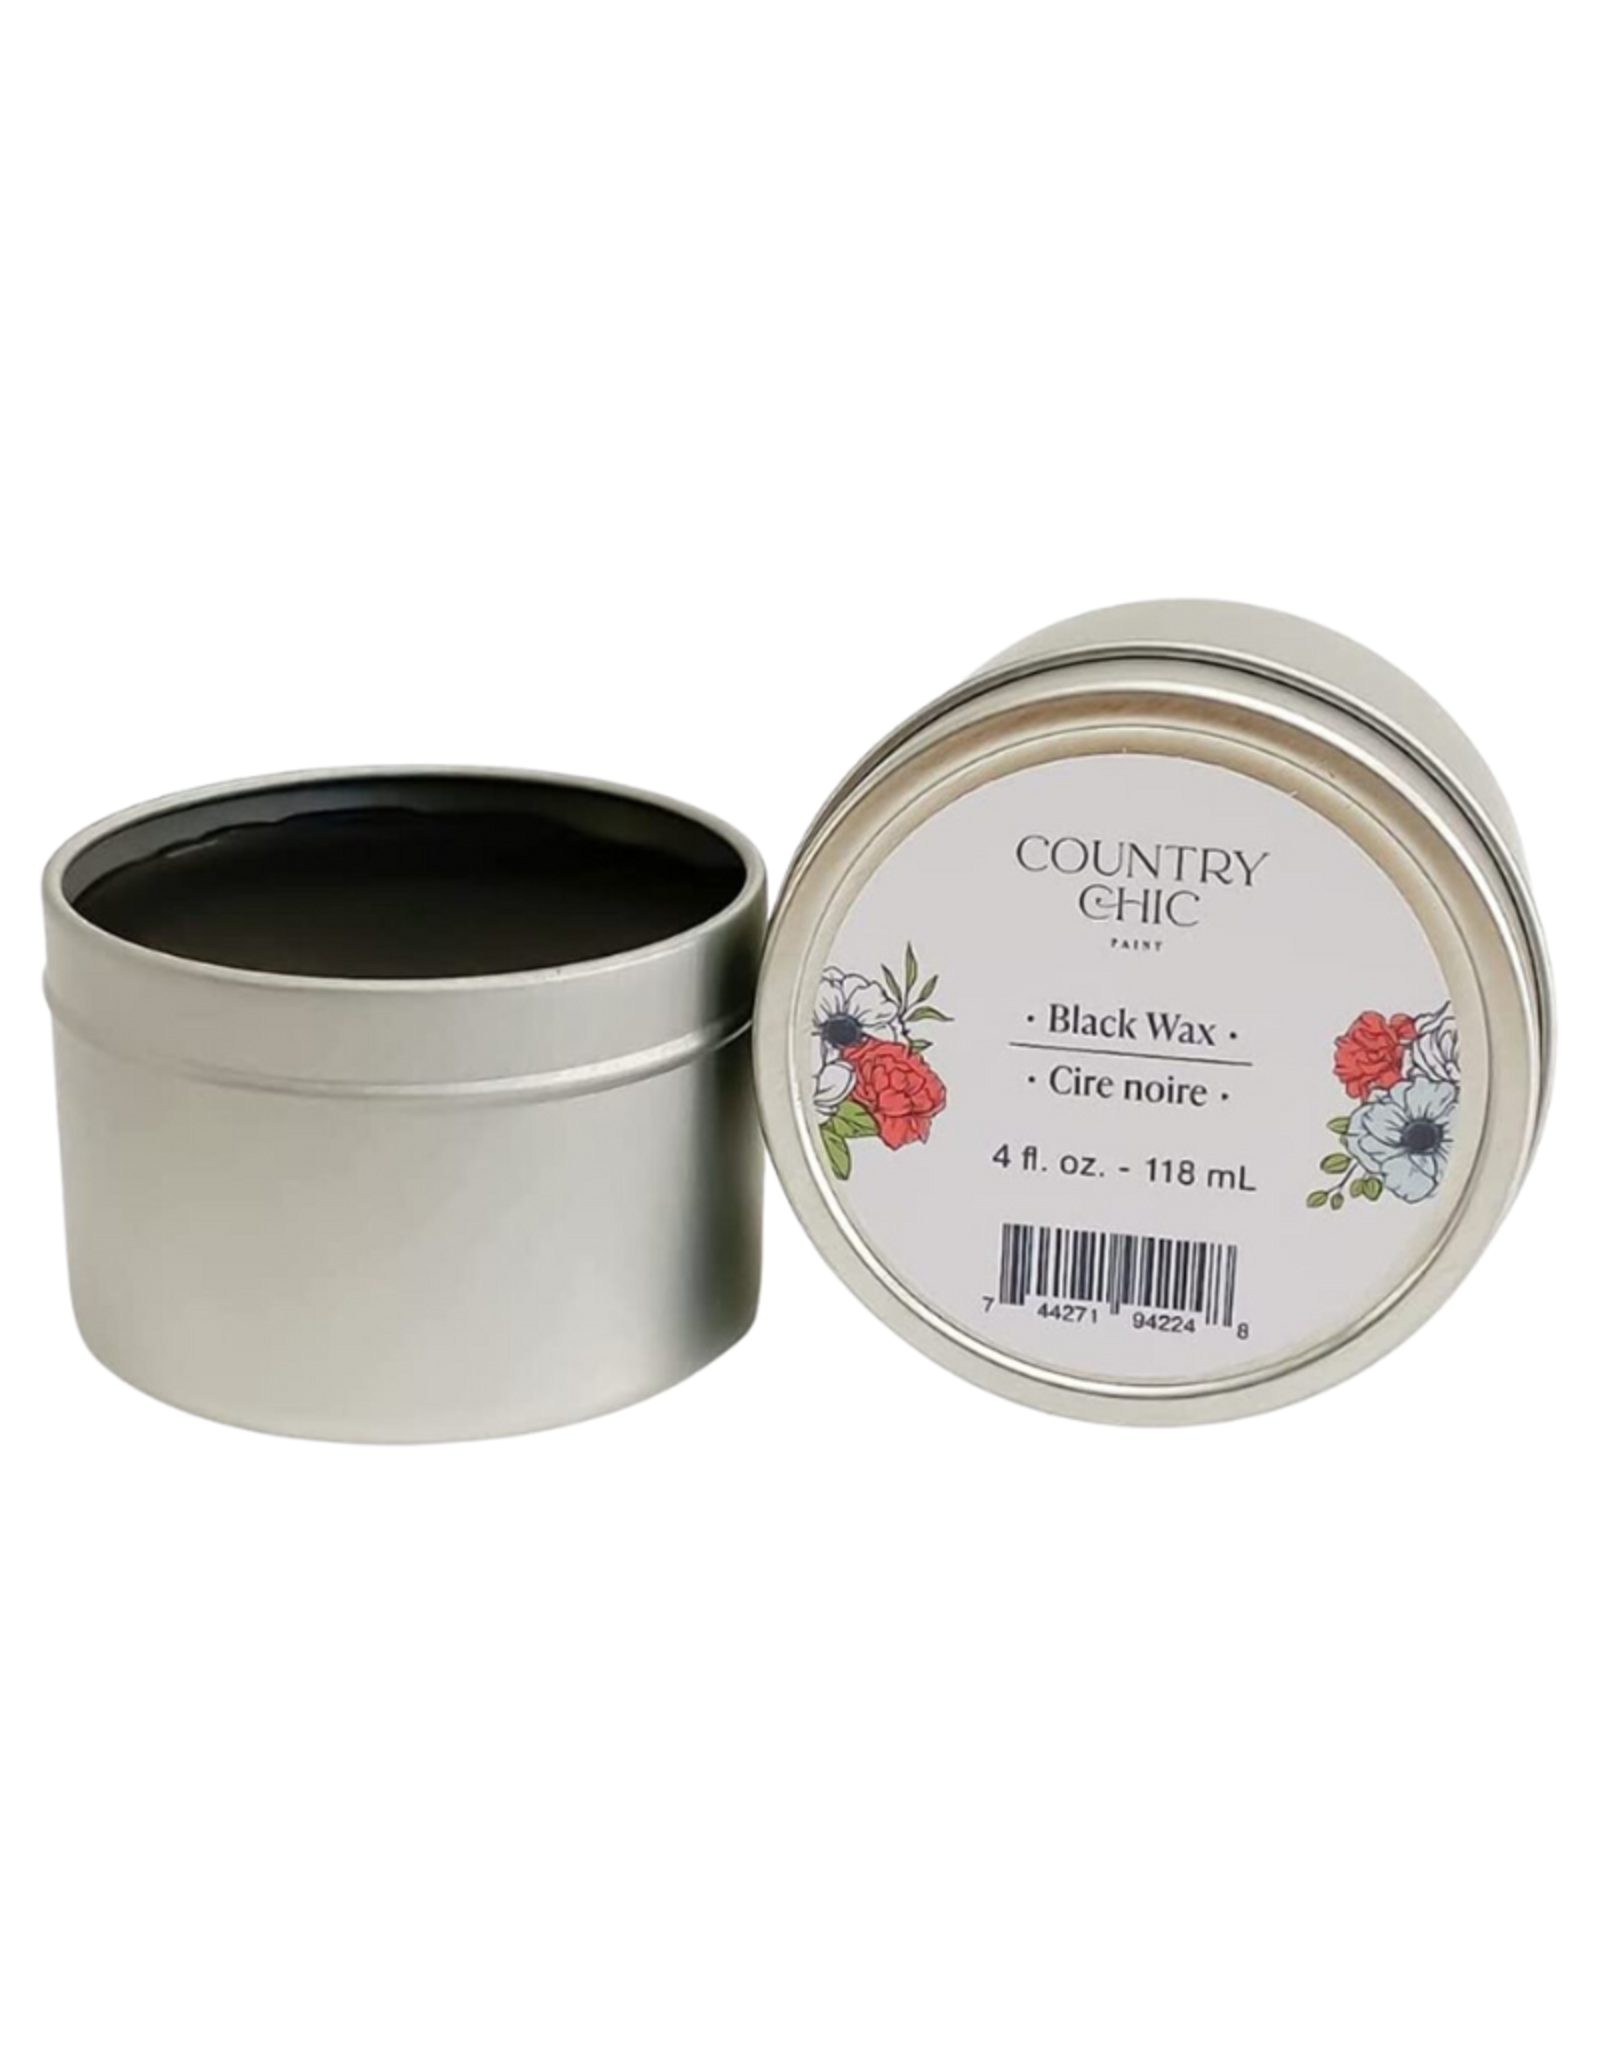 Country Chic Country Chic Black Wax 4oz